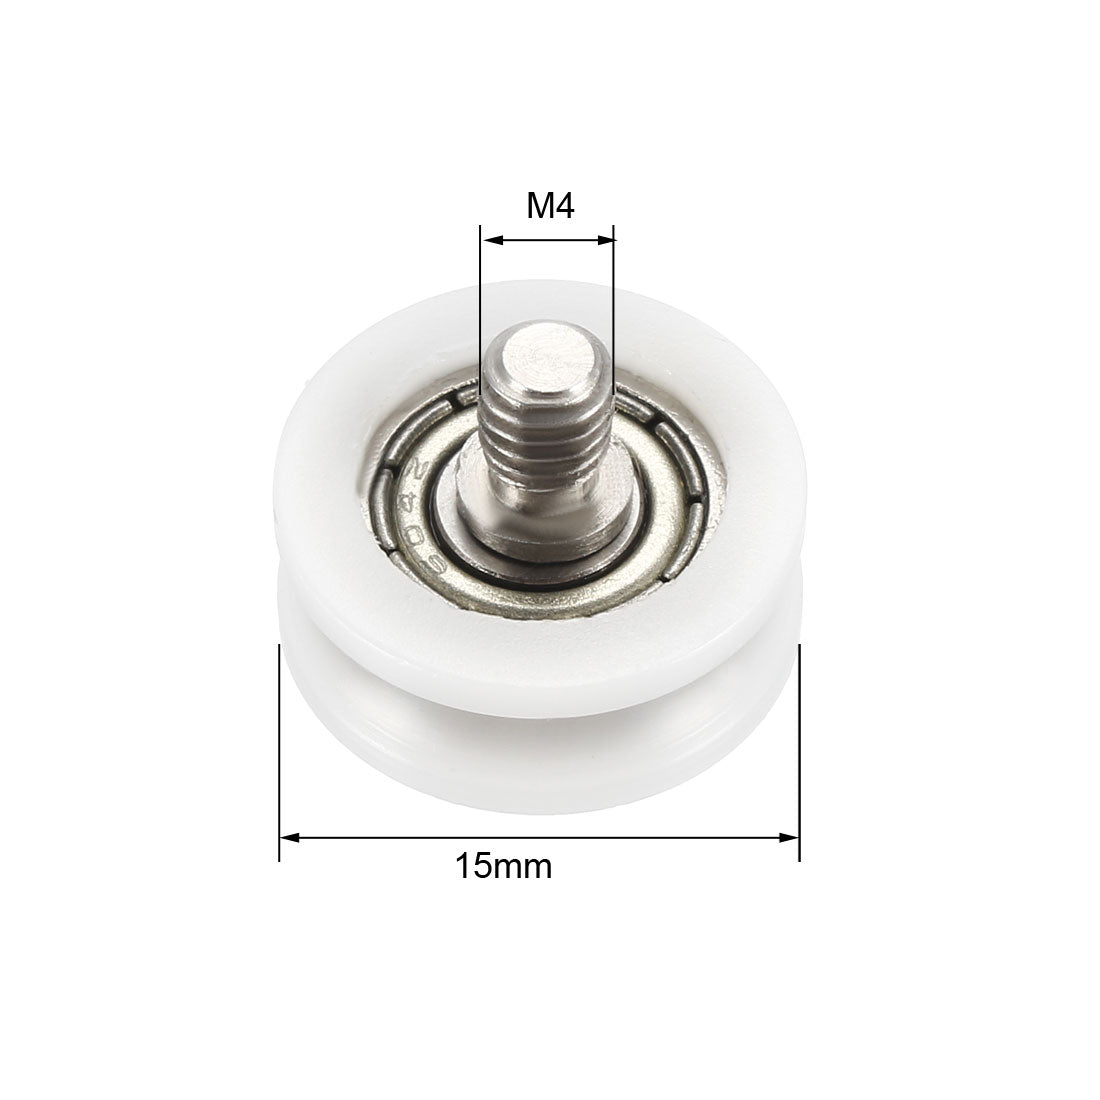 uxcell Uxcell 1mm Deep Metal V Groove Threaded Rod Track Guide Bearing Pulley Wheel White 15x6mm 2pcs